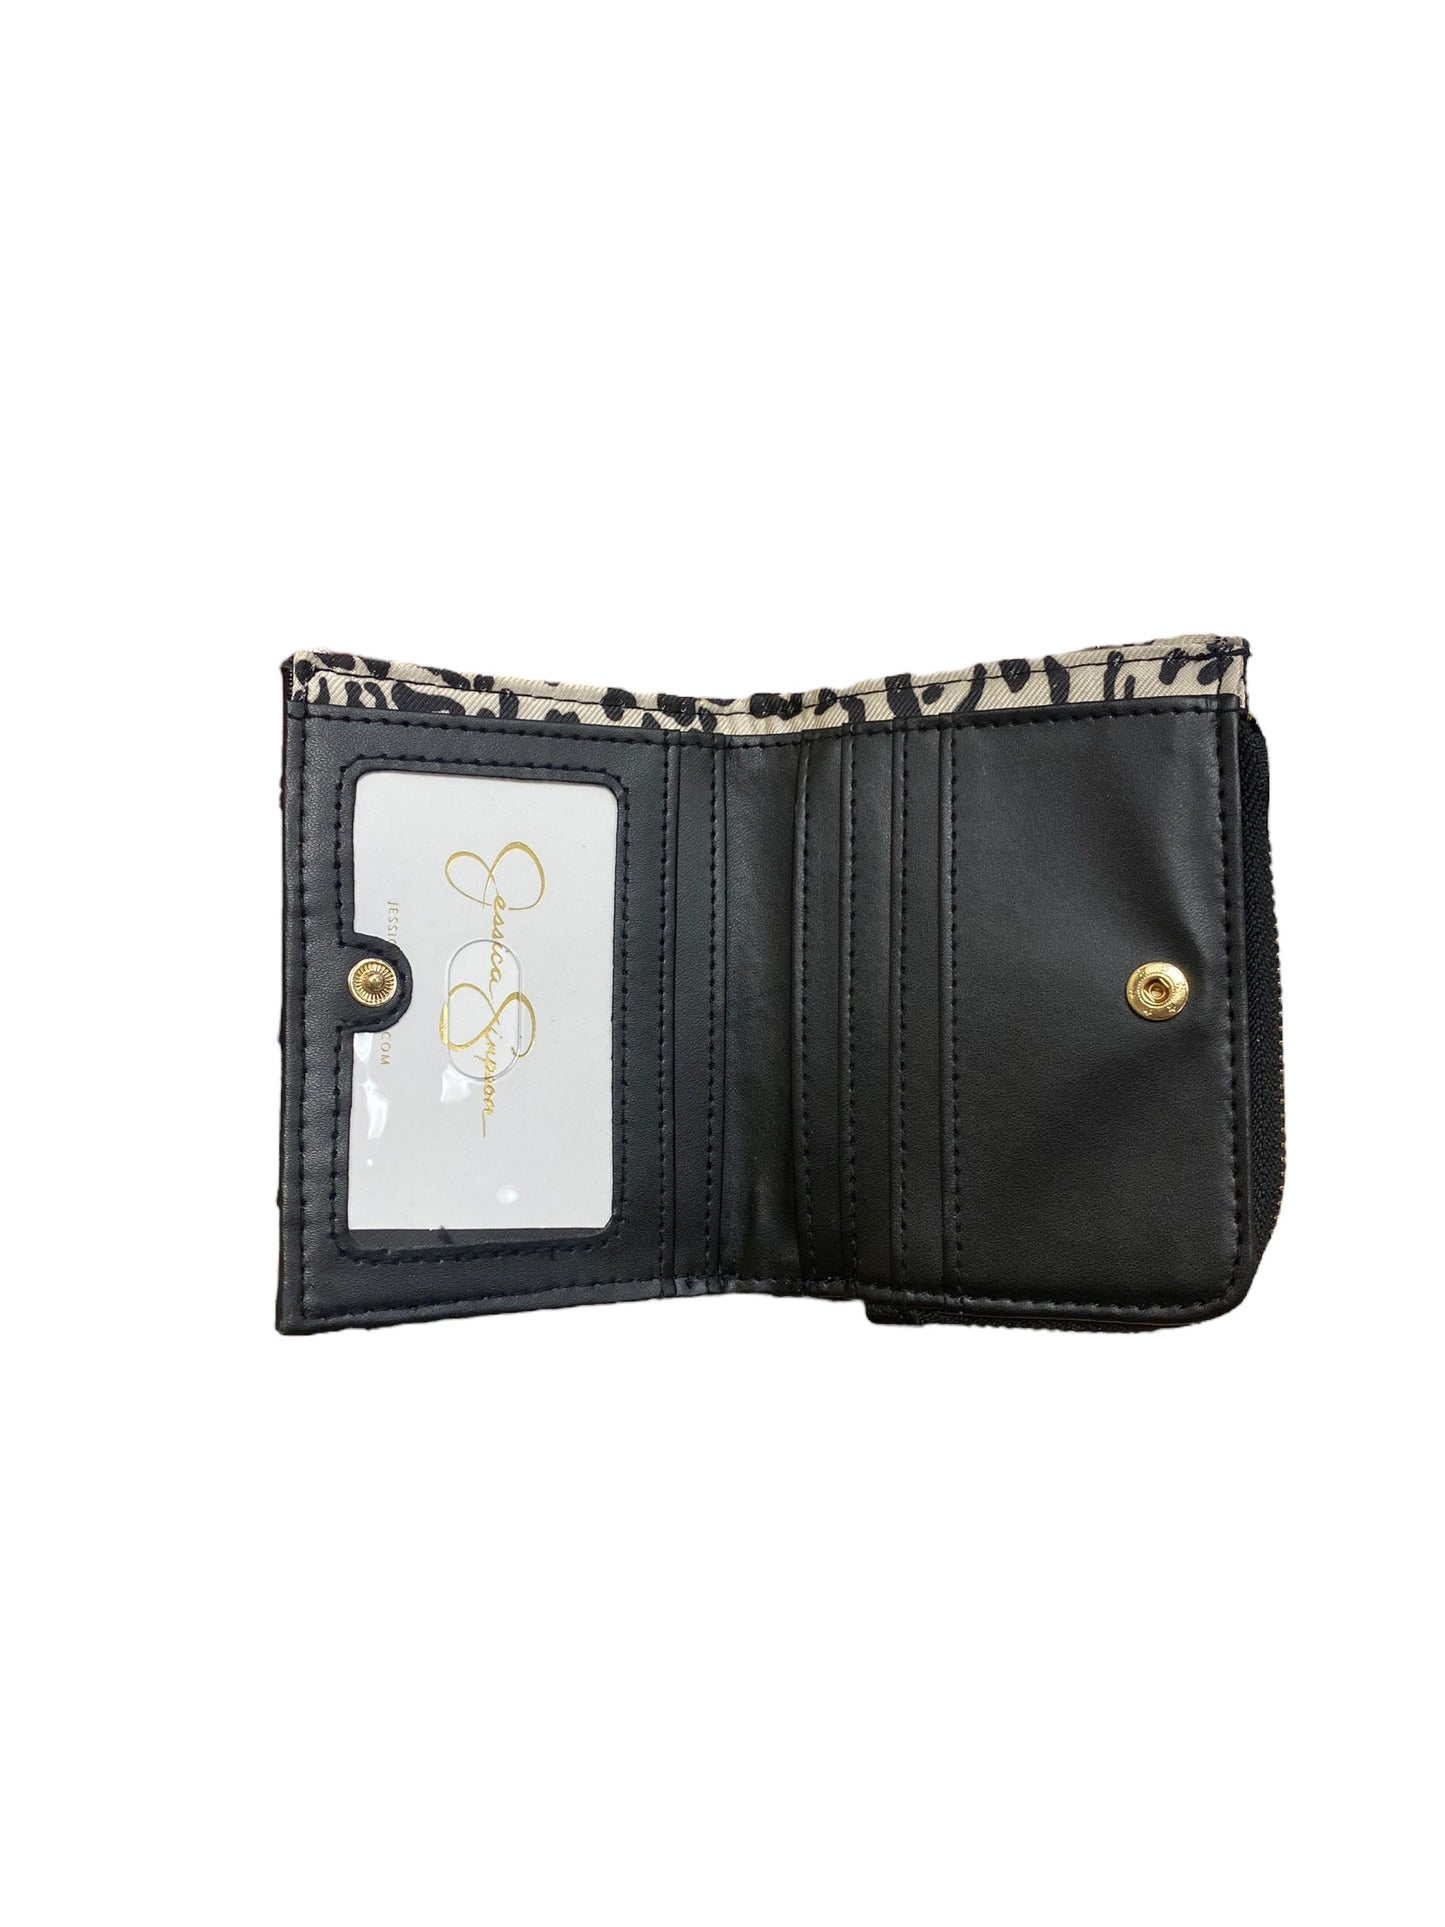 Wallet Jessica Simpson, Size Small